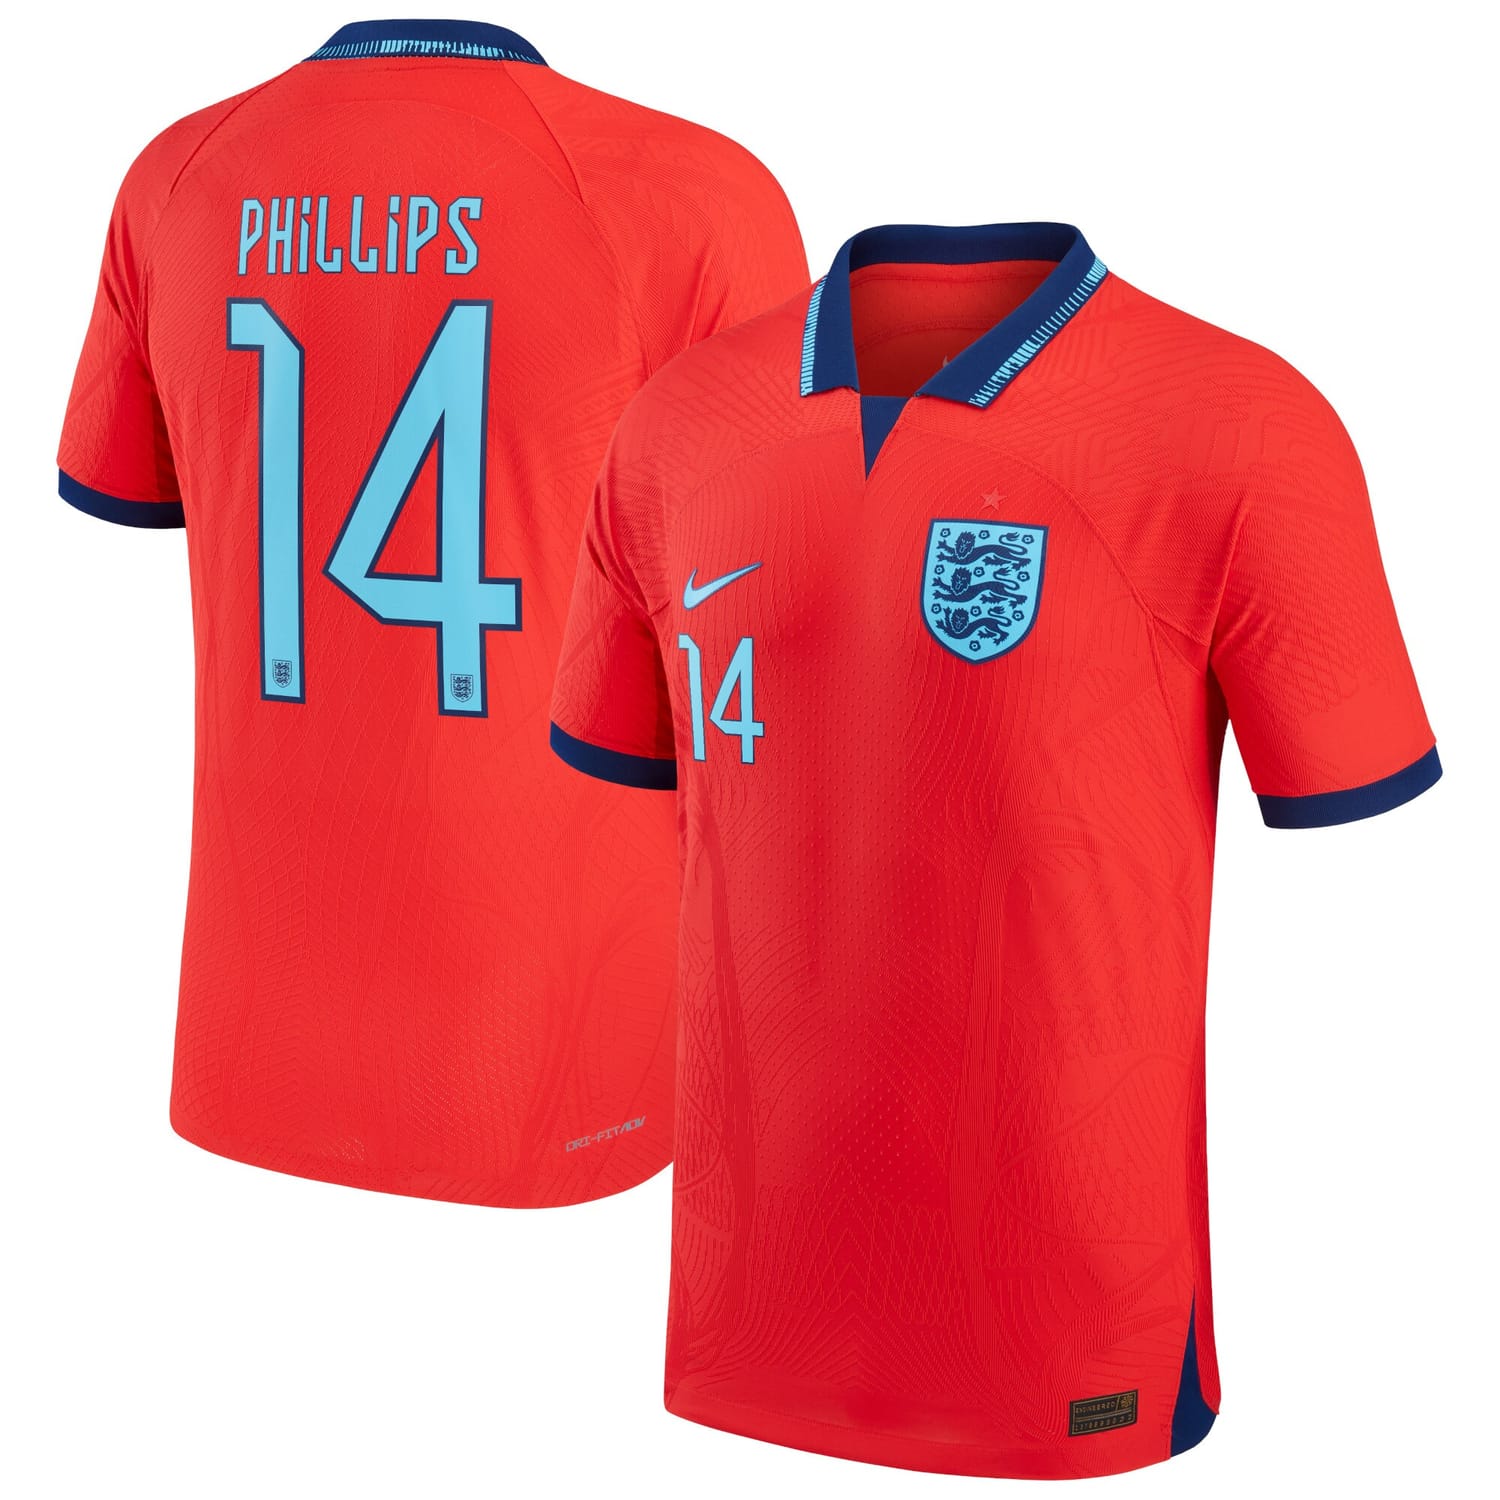 England National Team Away Authentic Jersey Shirt 2022 player Kalvin Phillips 14 printing for Men